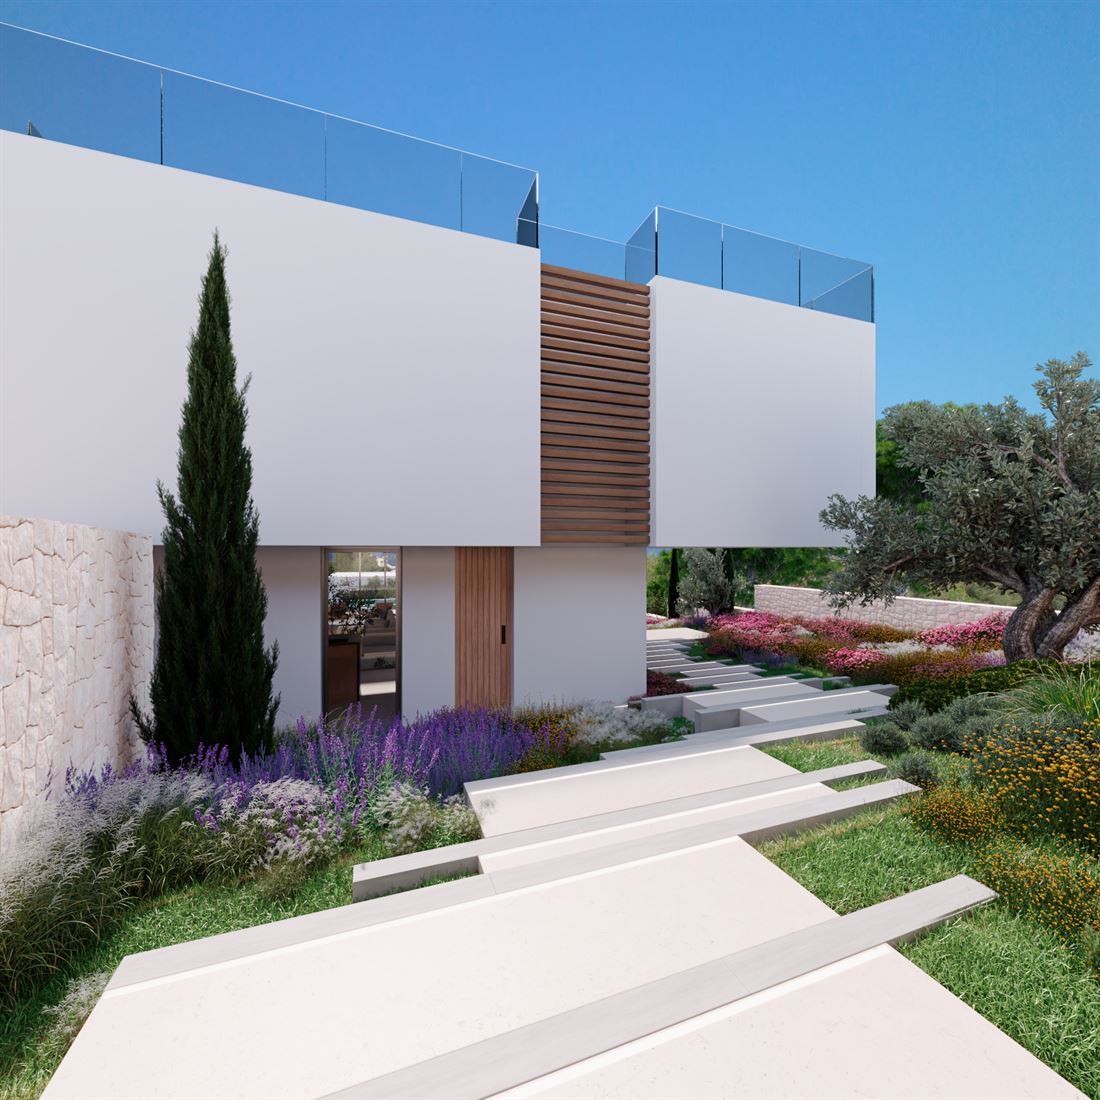 Luxurious residential complex situated in Santa Eulalia del Río for sale